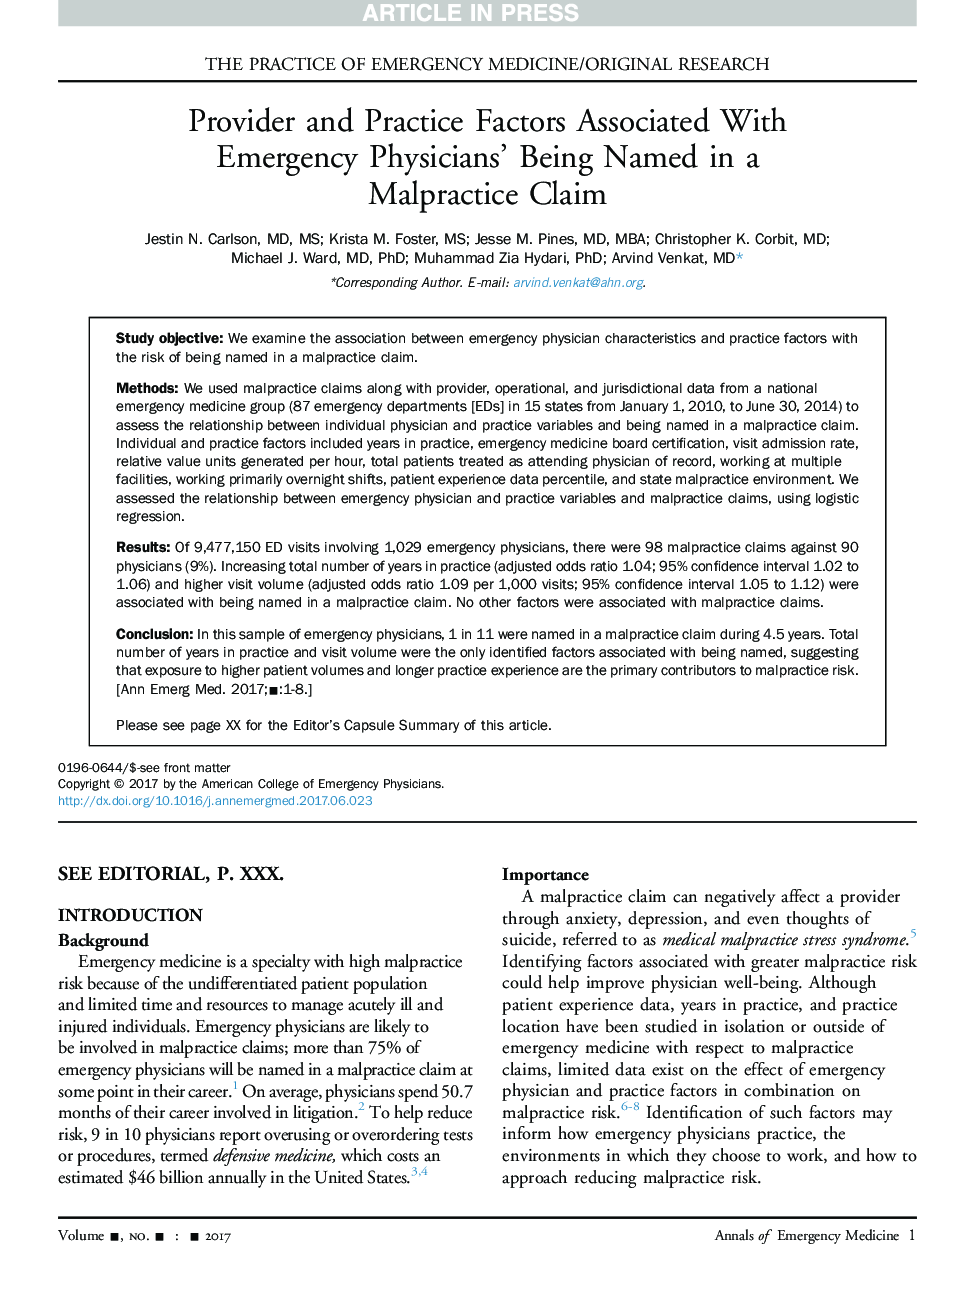 Provider and Practice Factors Associated With Emergency Physicians' Being Named in a Malpractice Claim